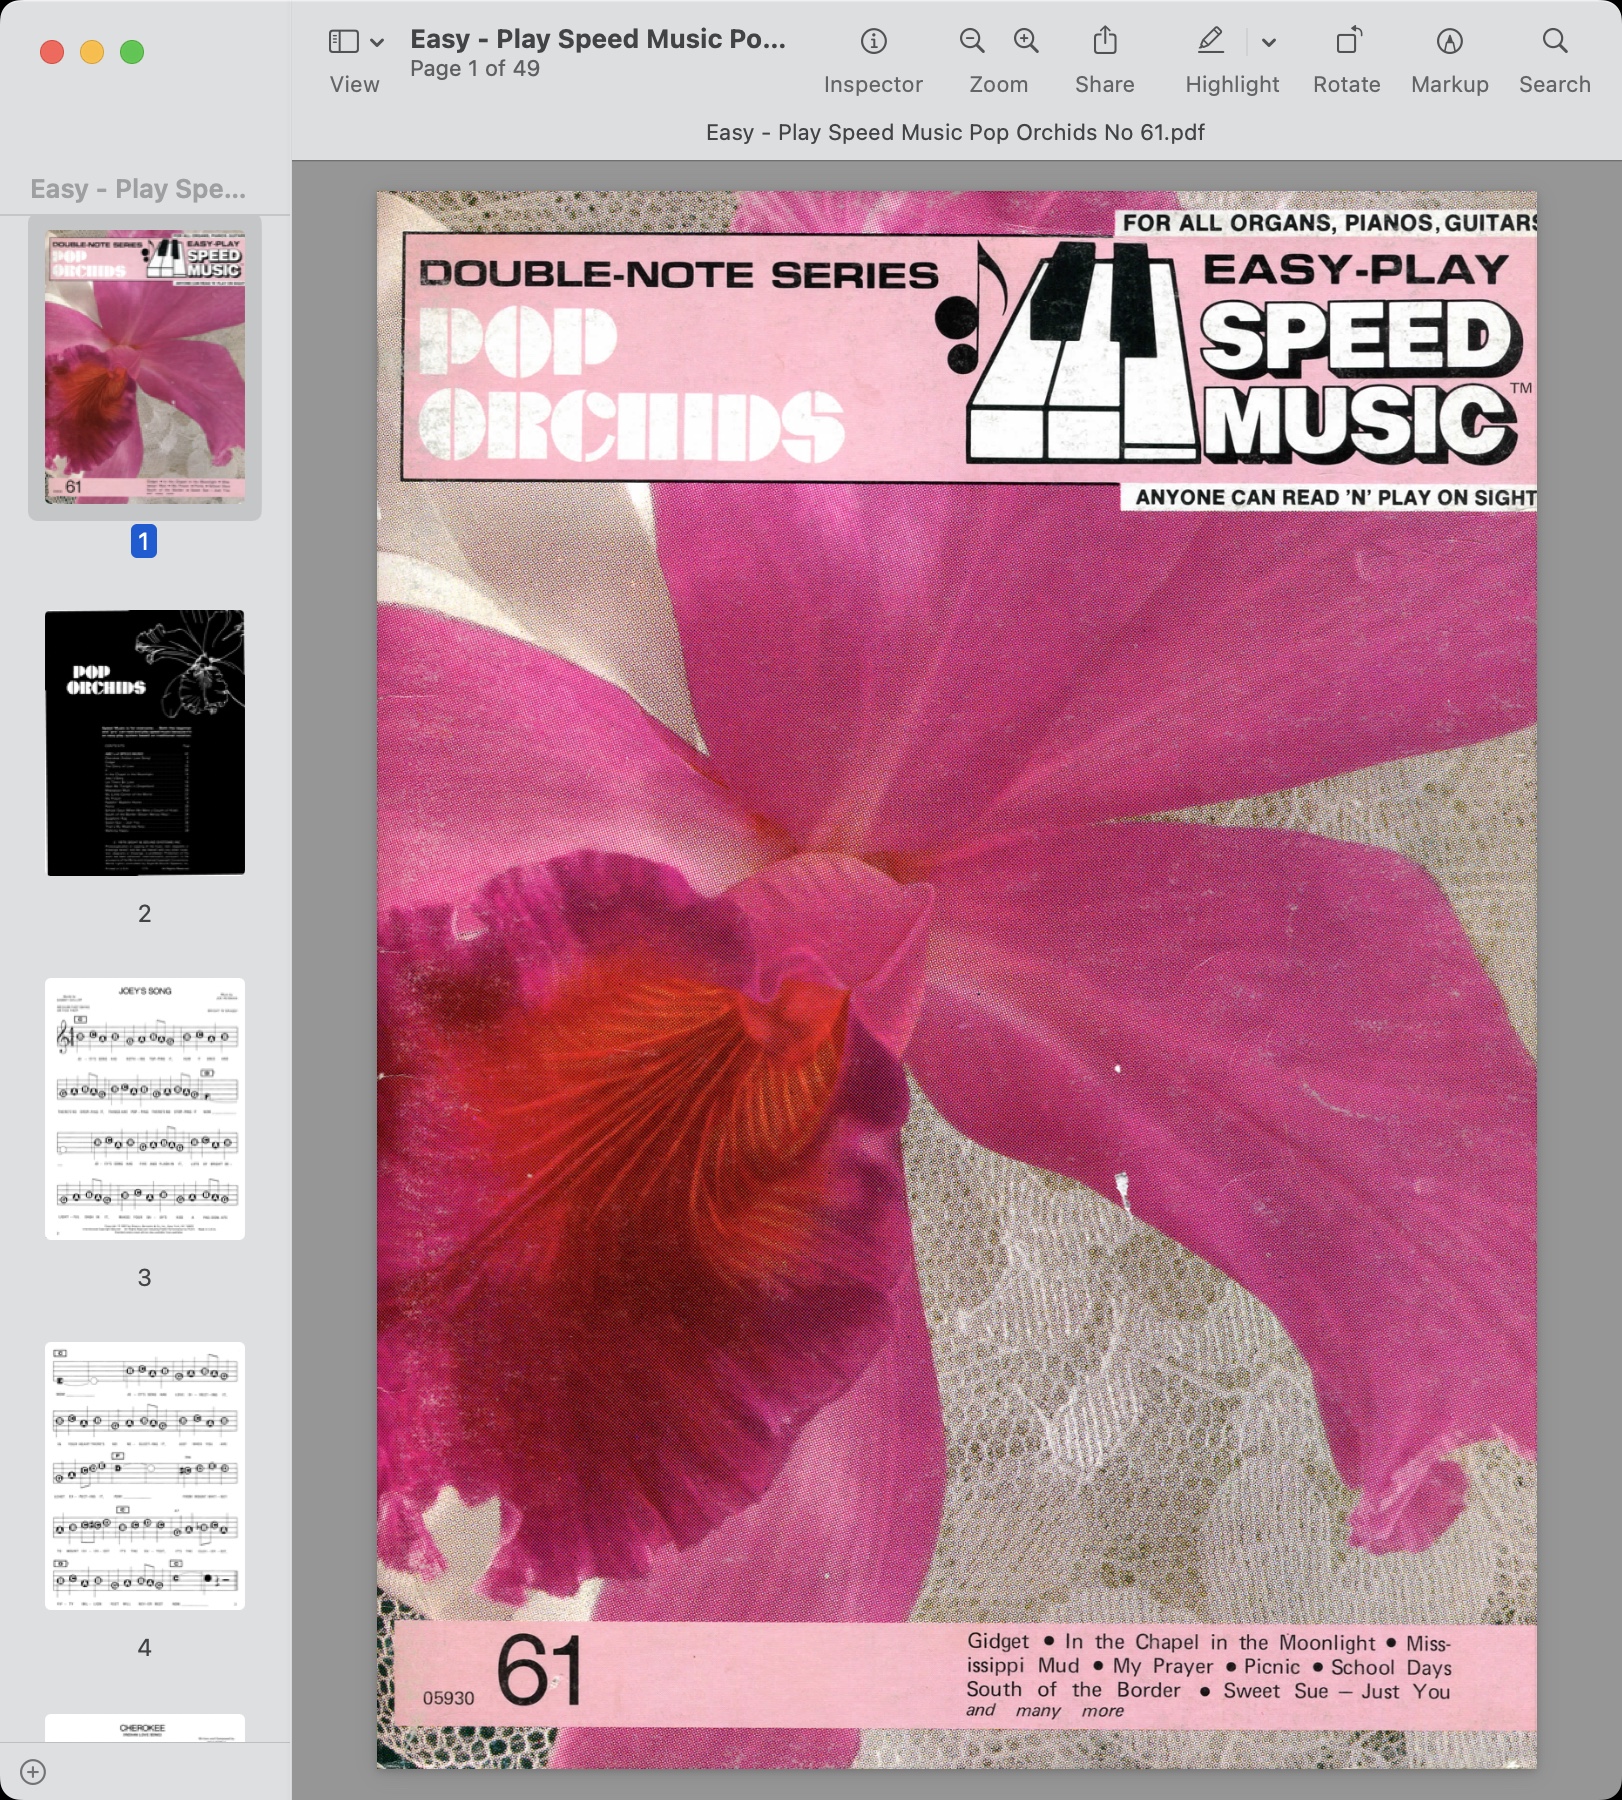 Easy - Play Speed Music - 61 - Pop Orchids.jpg